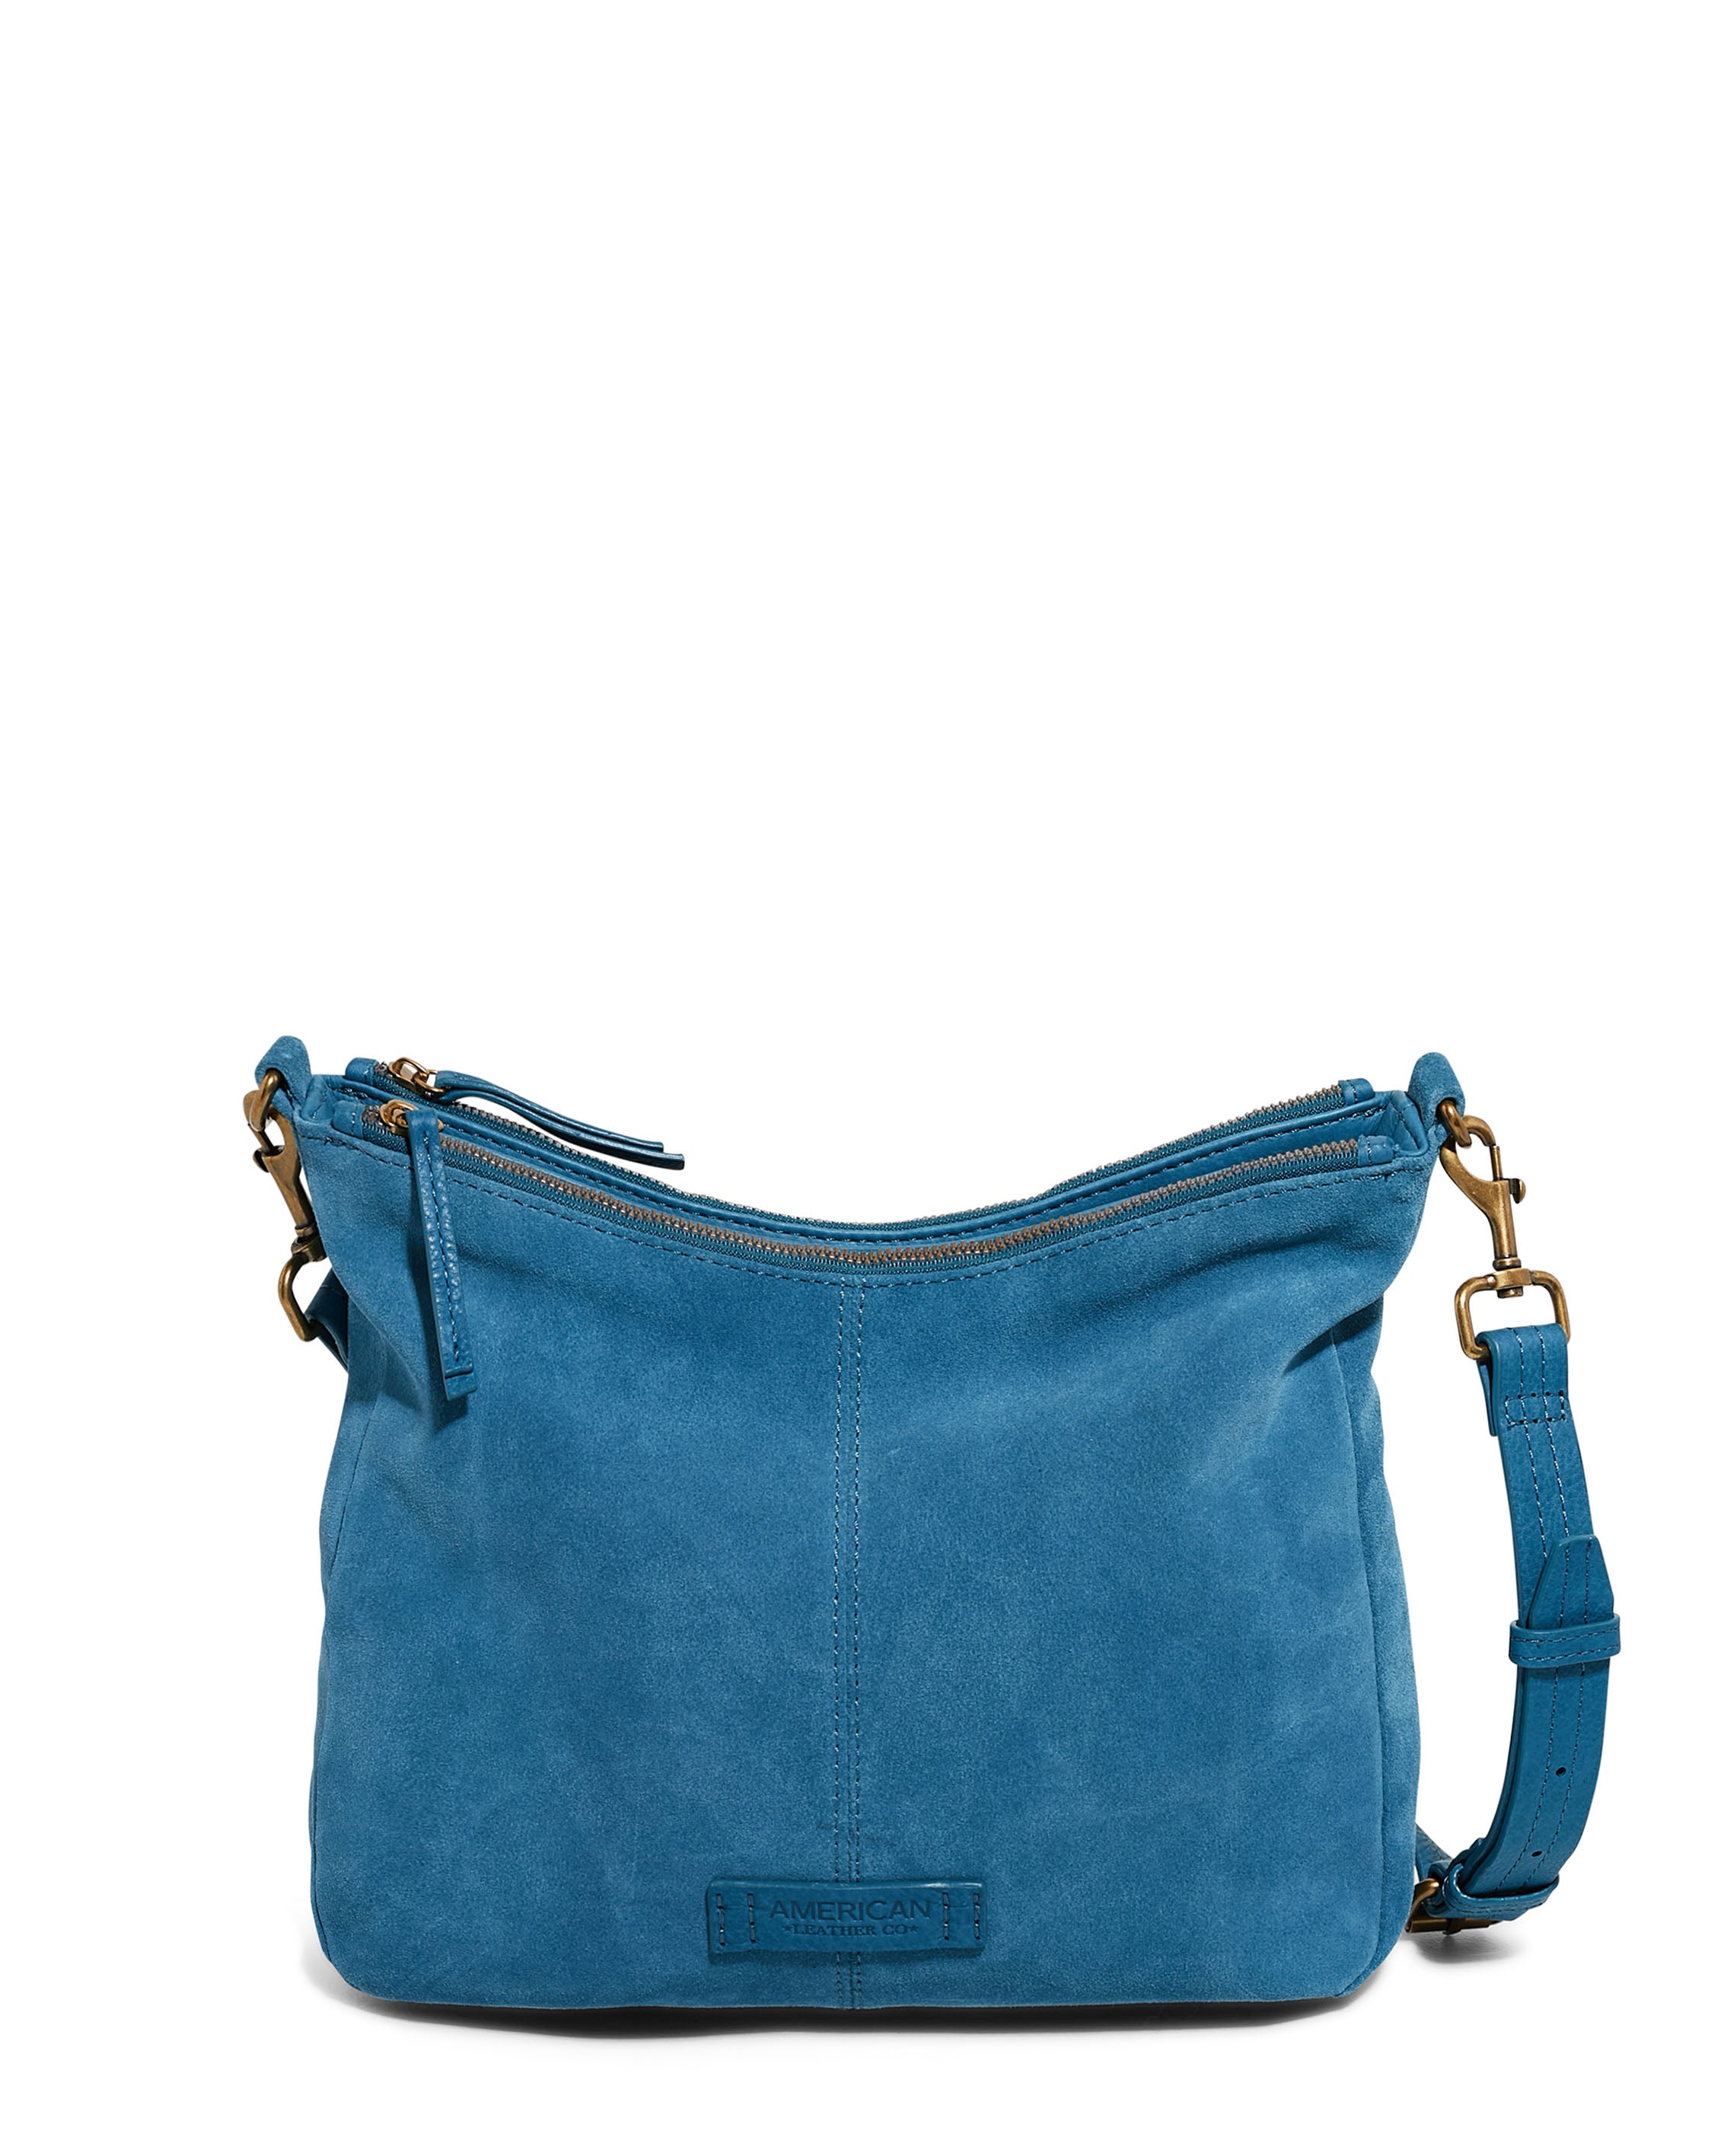 Small turquoise BLUE suede leather bag. Crossbody or shoulder bag in  GENUINE leather. Adjustable strap + zipper. Turquoise suede purse